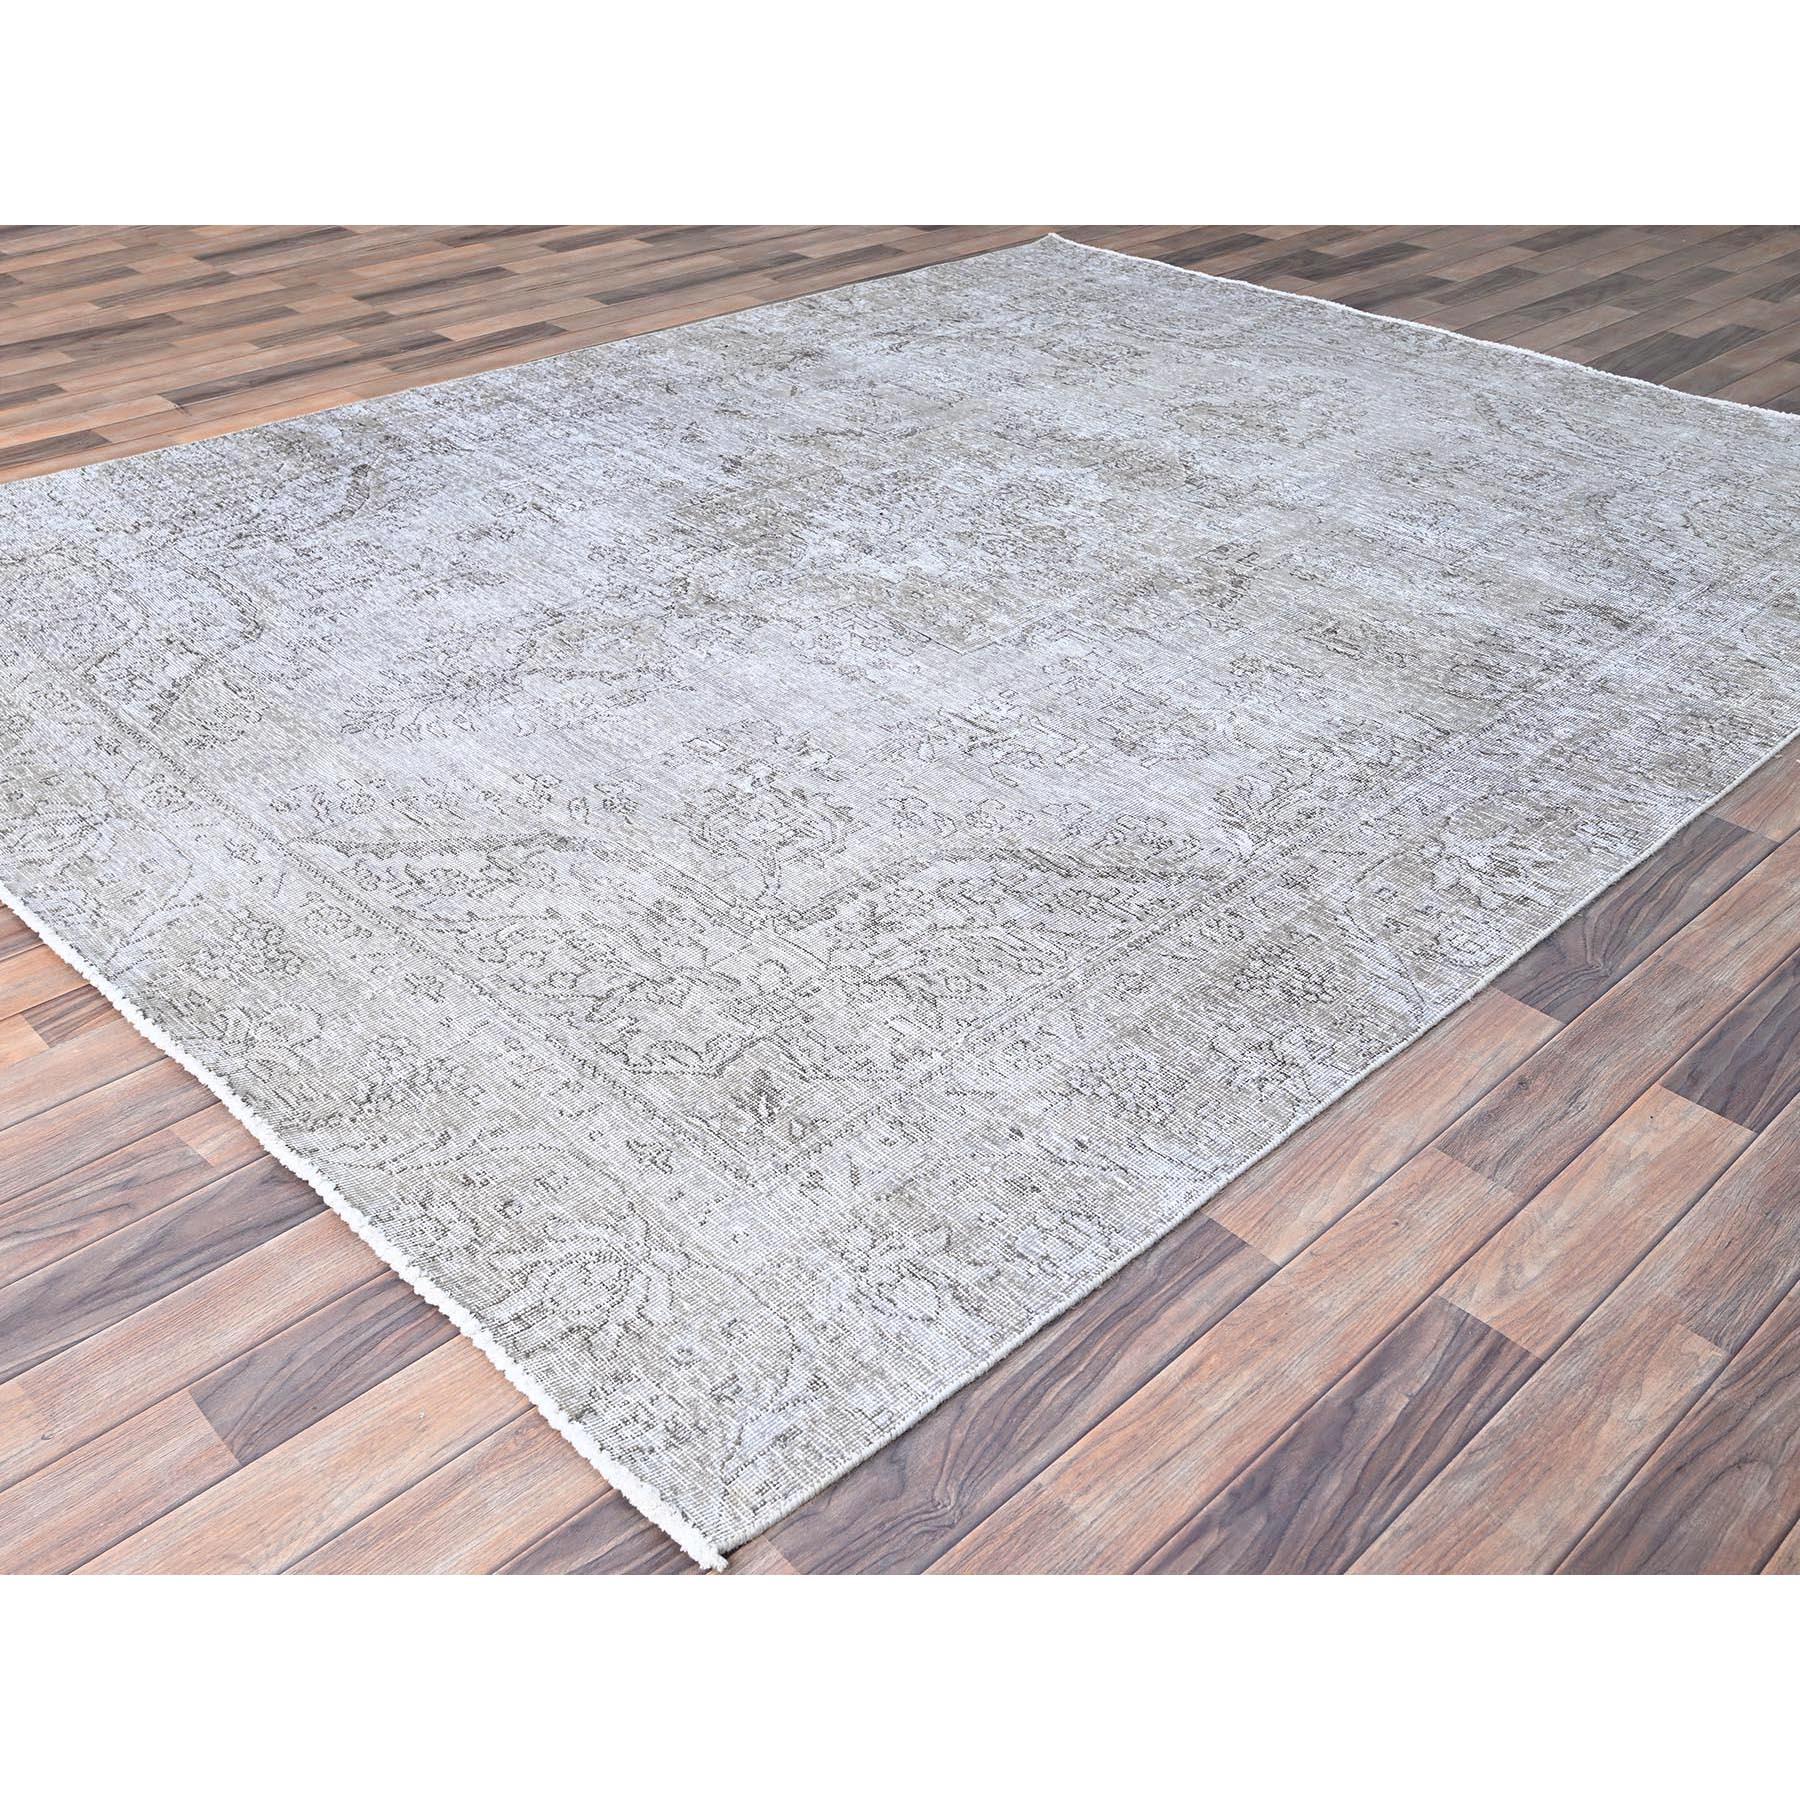 Gray Evenly Worn Old Persian Tabriz White Wash Clean Hand Knotted Soft Wool Rug In Excellent Condition For Sale In Carlstadt, NJ